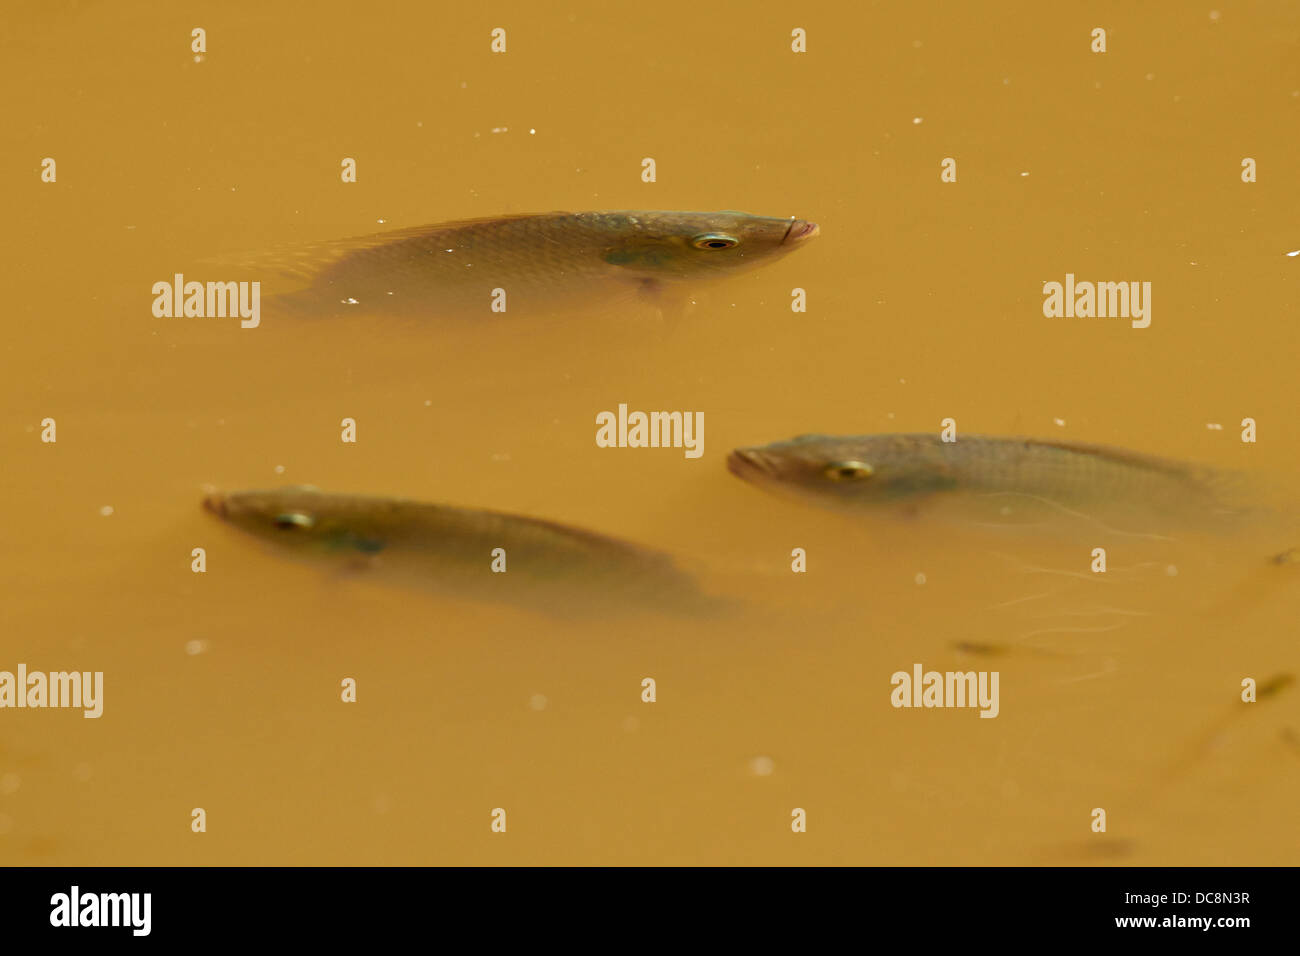 Tilapia fishes in muddy water Stock Photo